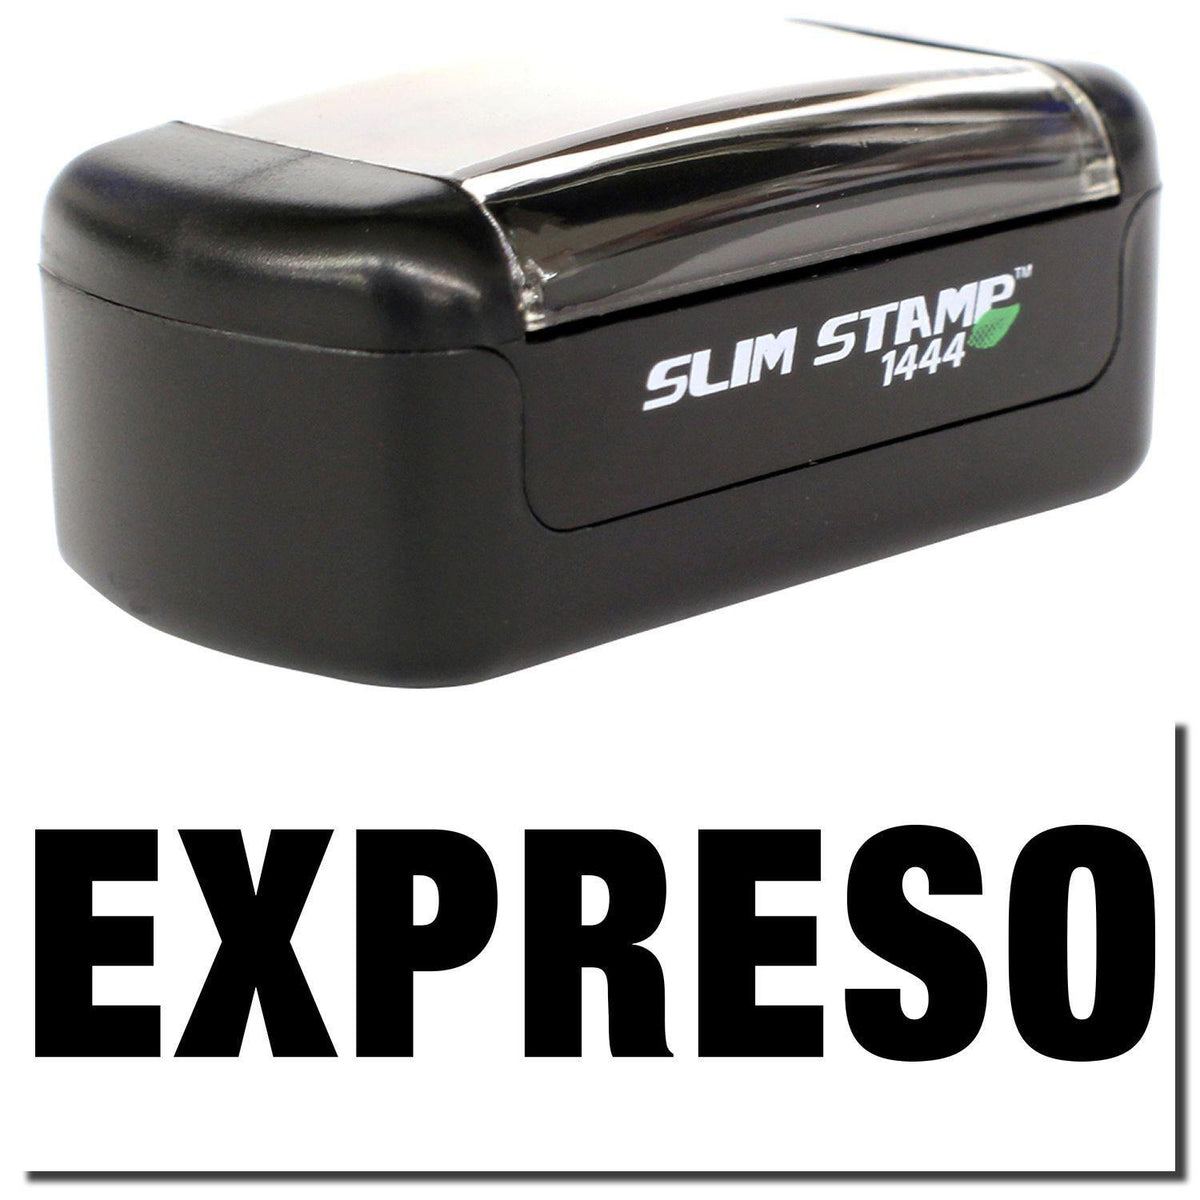 A stock office pre-inked stamp with a stamped image showing how the text &quot;EXPRESO&quot; is displayed after stamping.